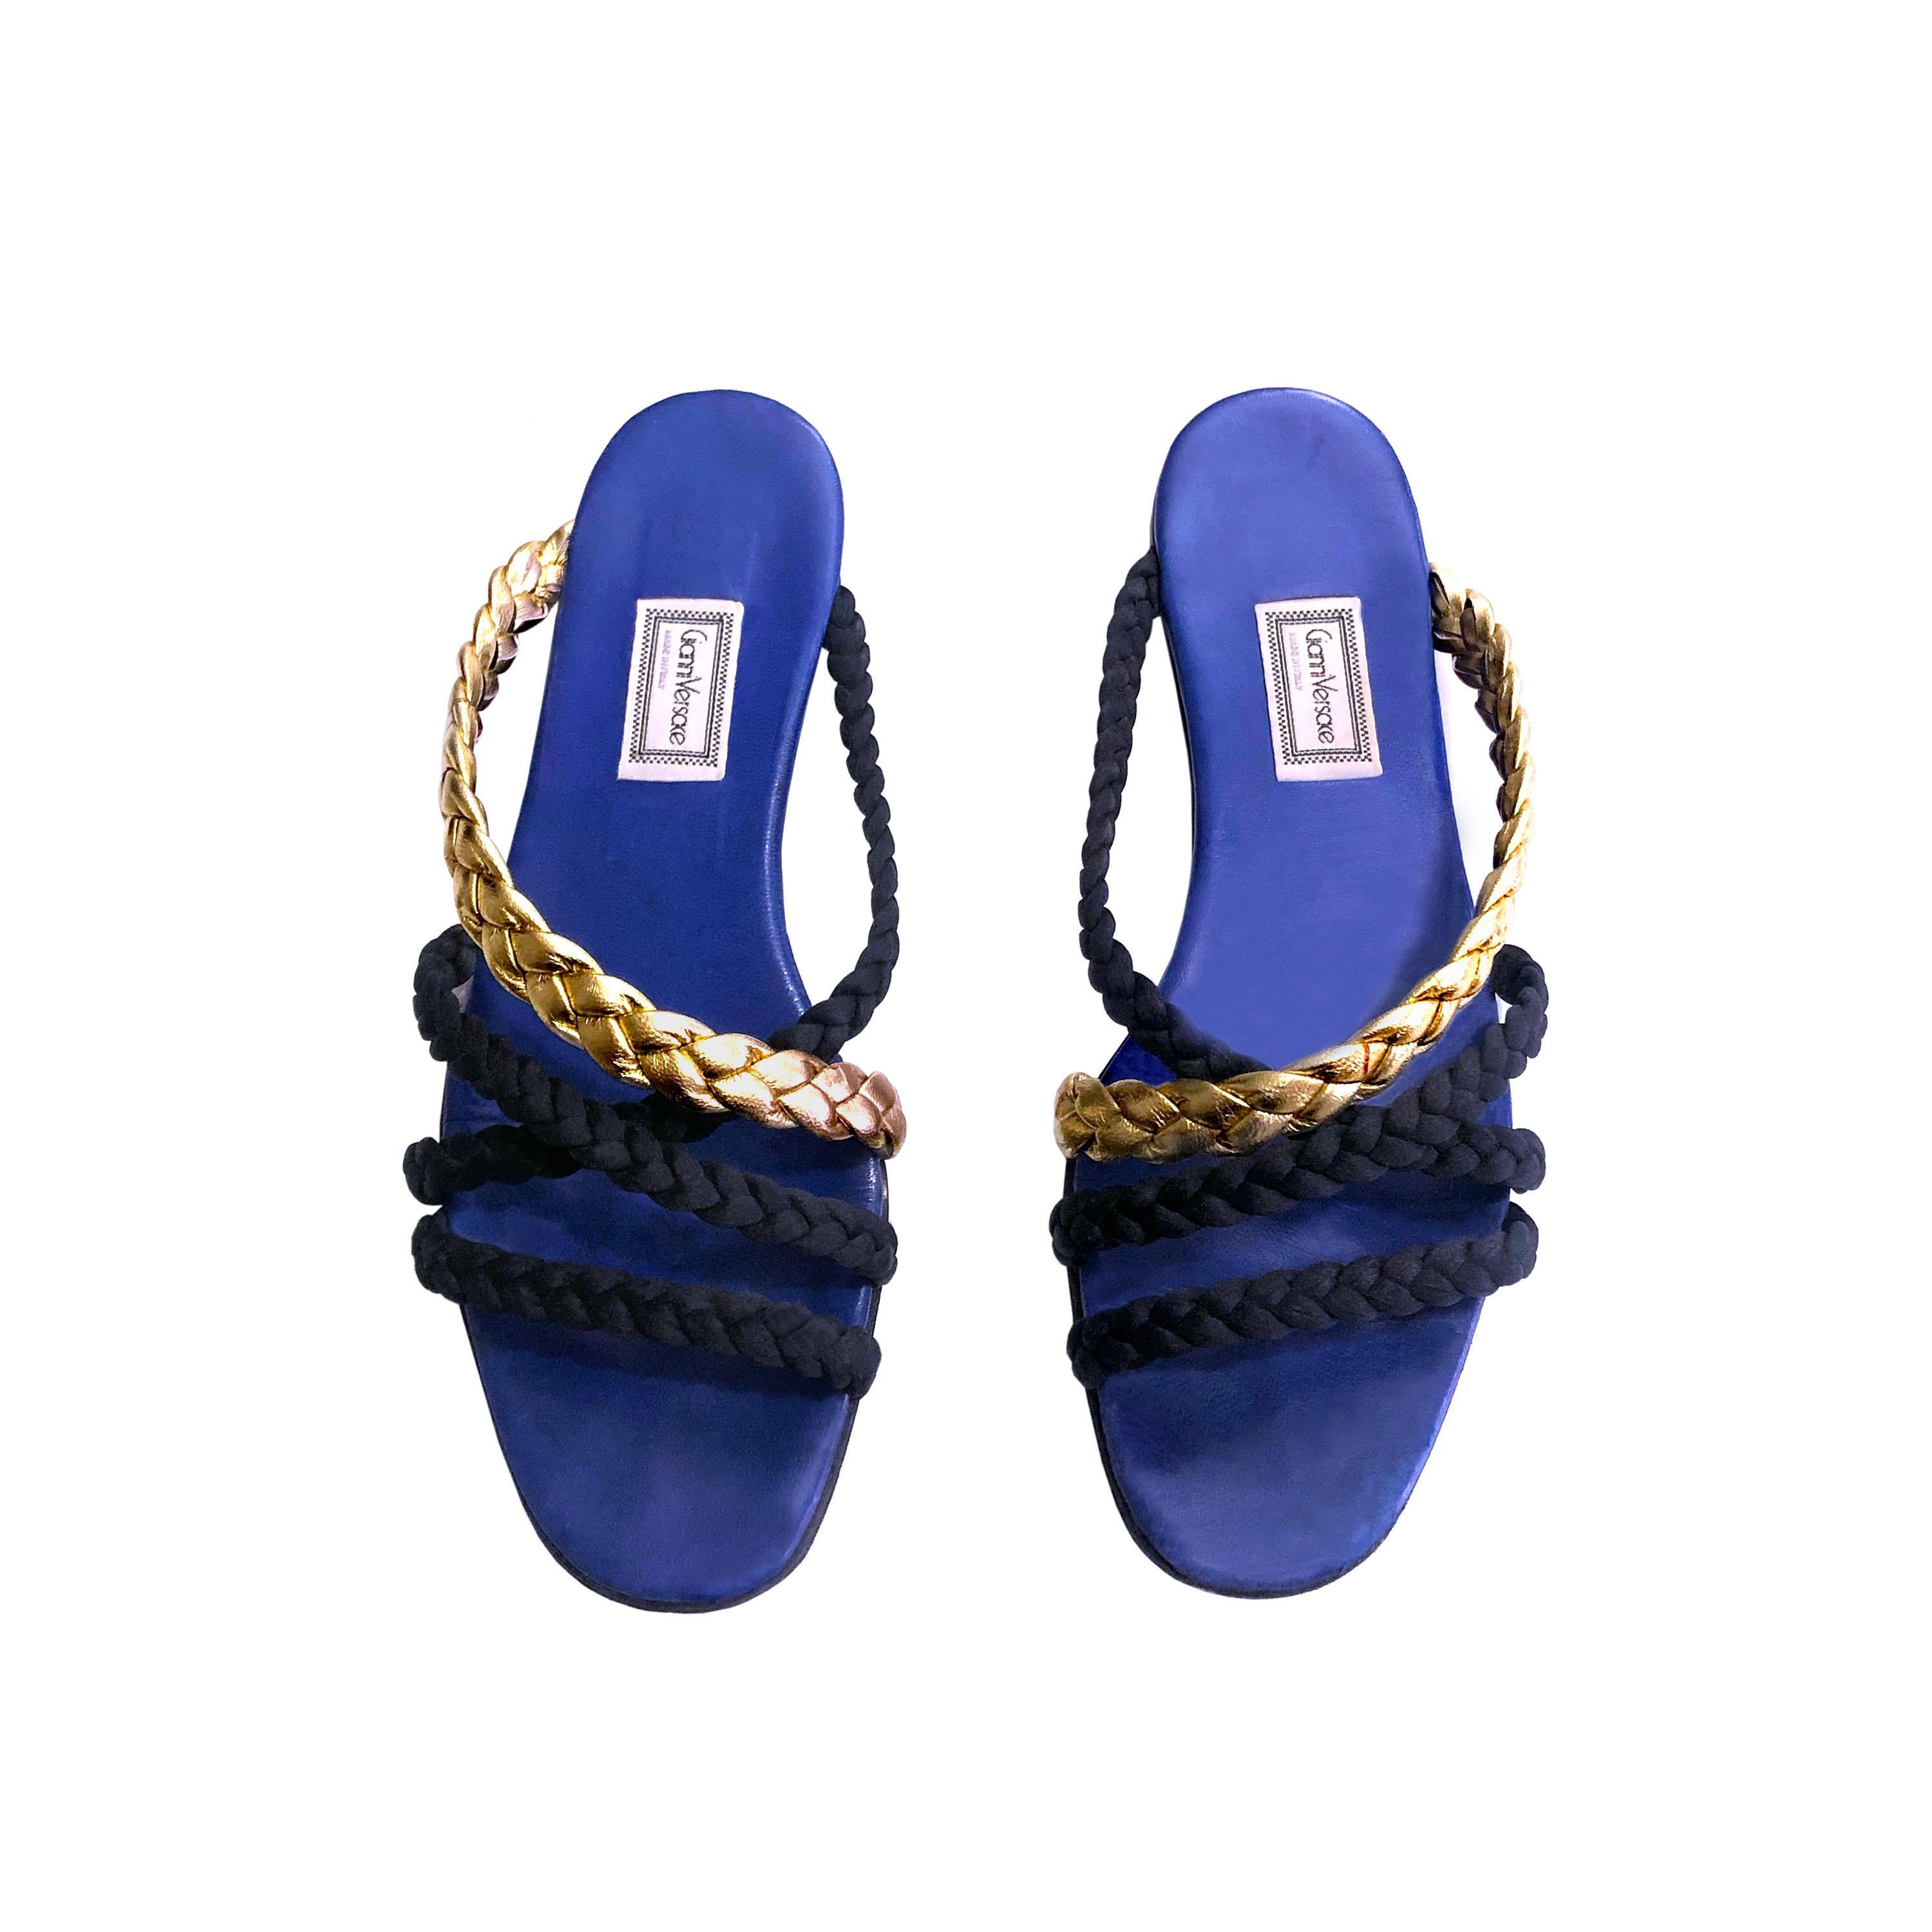 Gianni Versace - 1980s Vintage - Sandals - Gold Leather Plaited Straps - EU 37.5 In Good Condition For Sale In KENT, GB